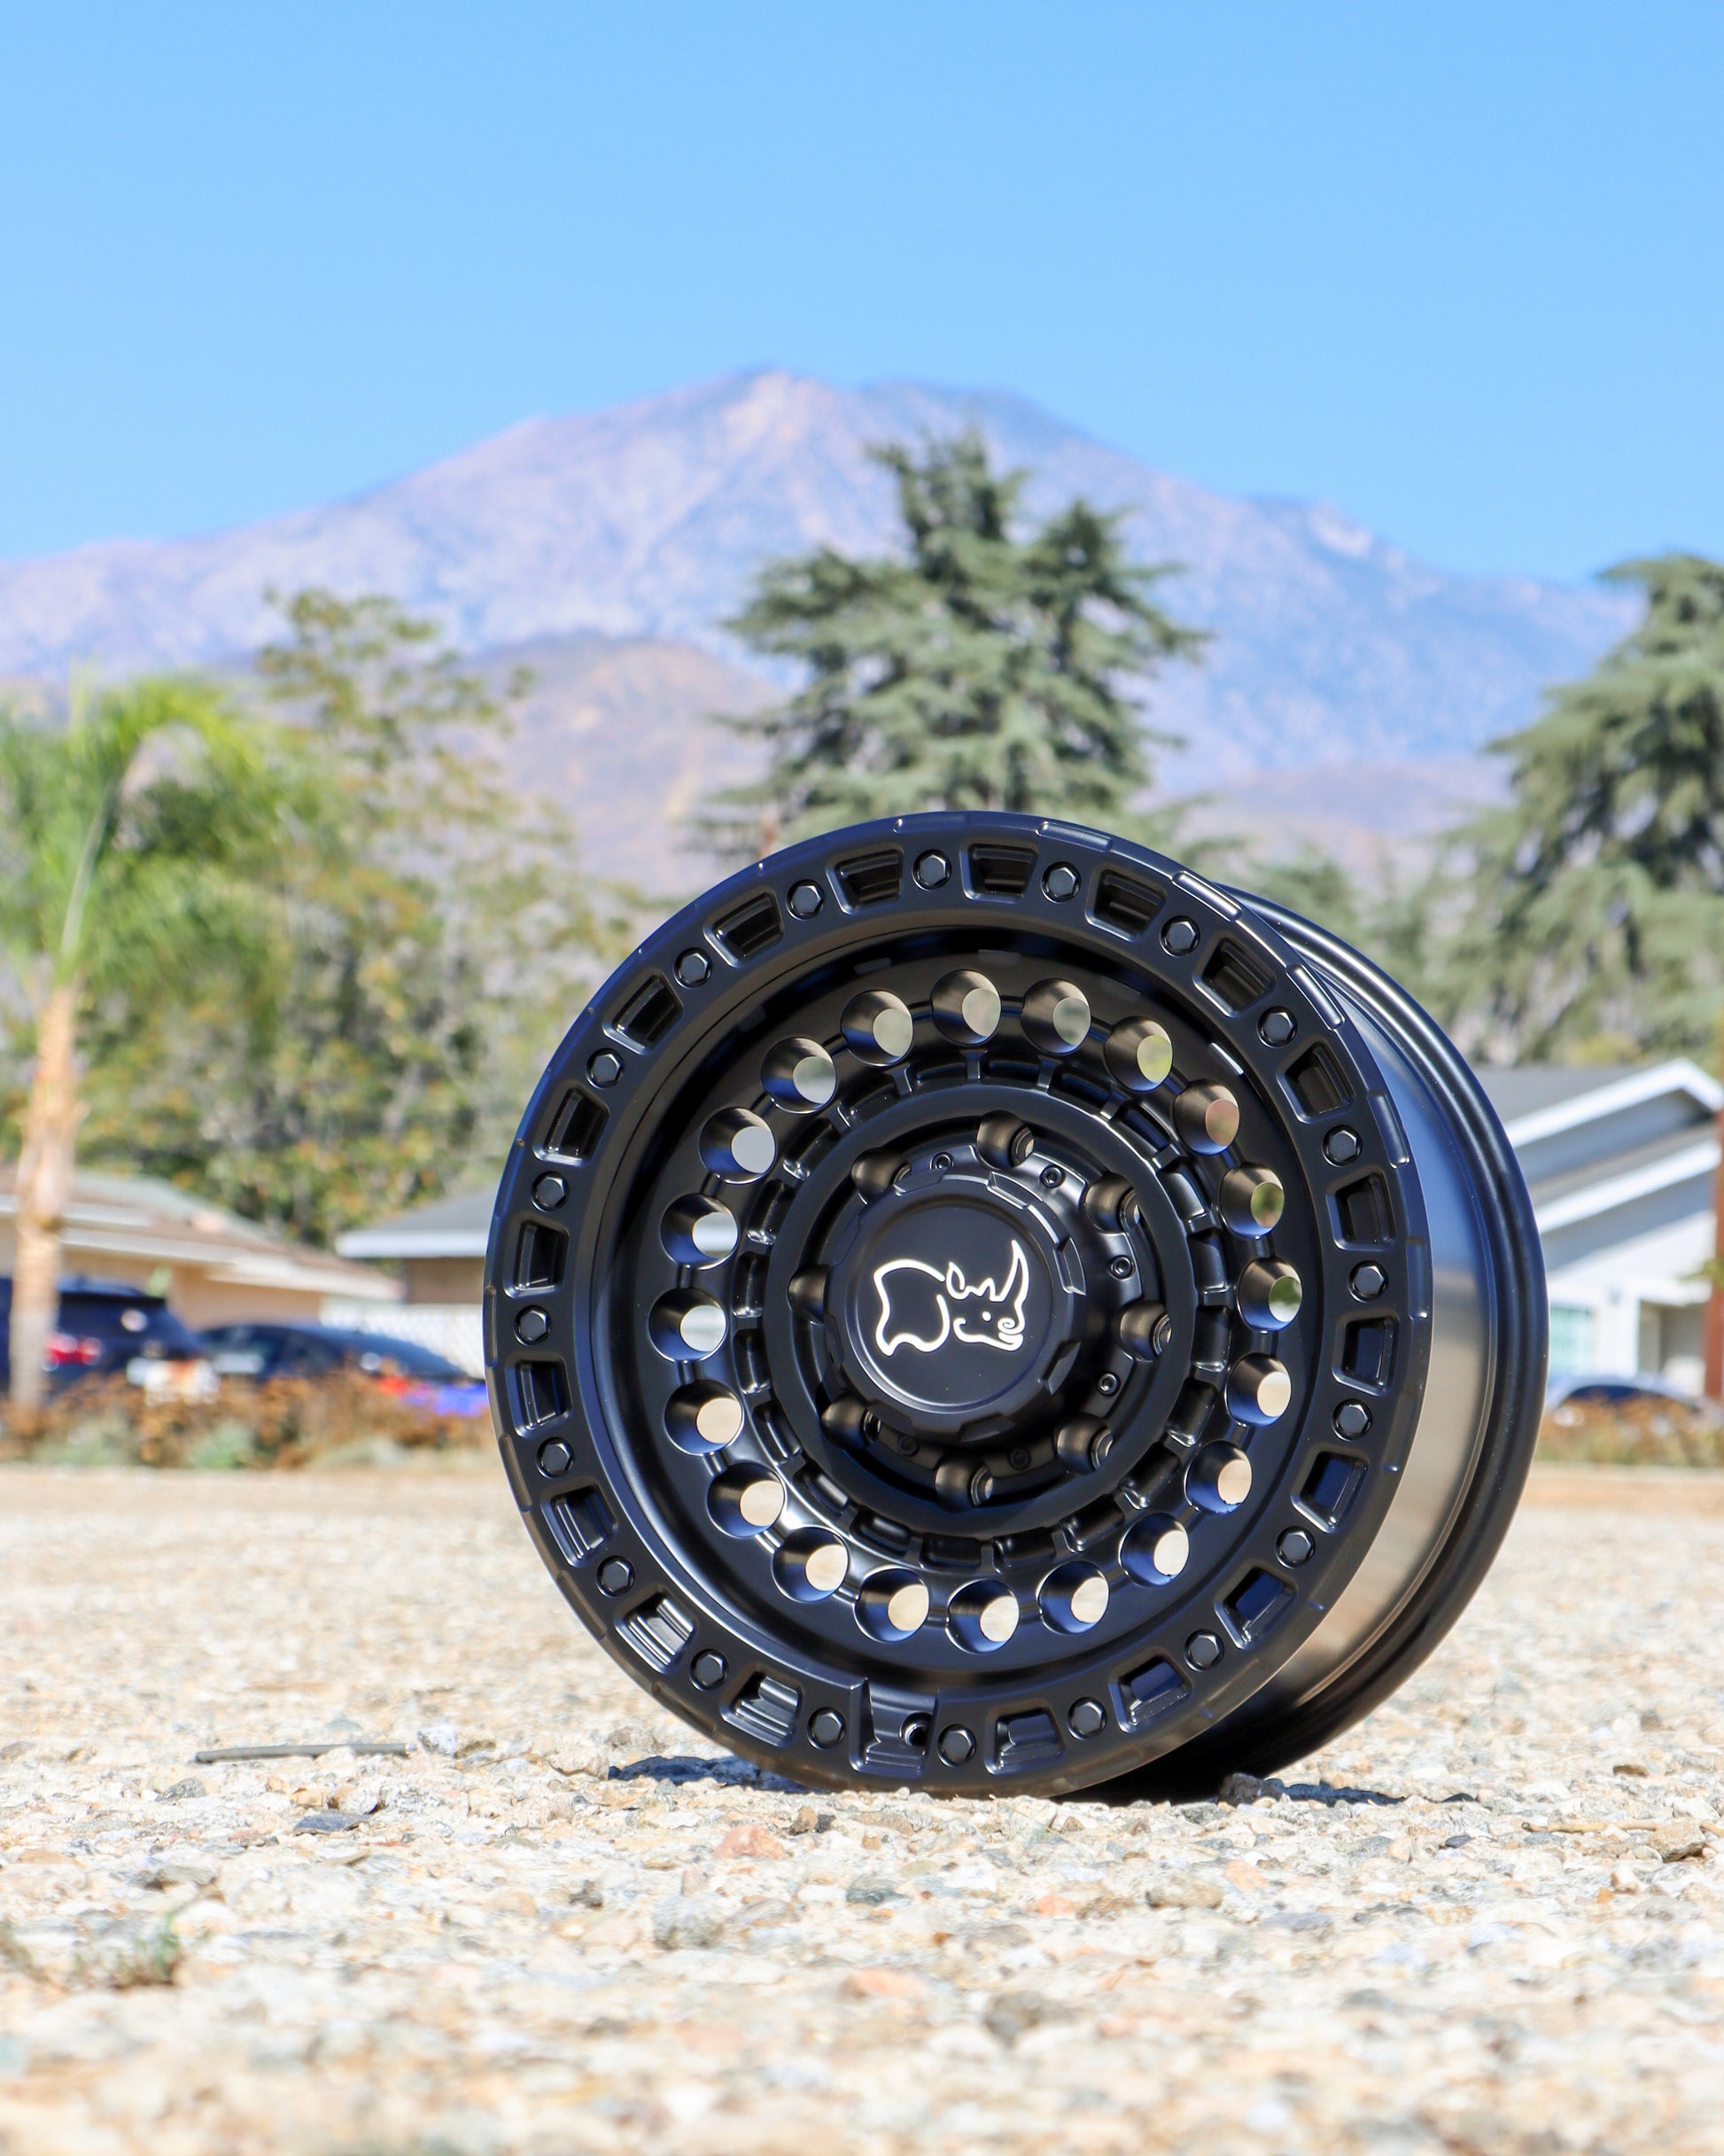 Black Rhino Sentinel Wheel in a matte black finish, on the ground with a majestic mountain background.